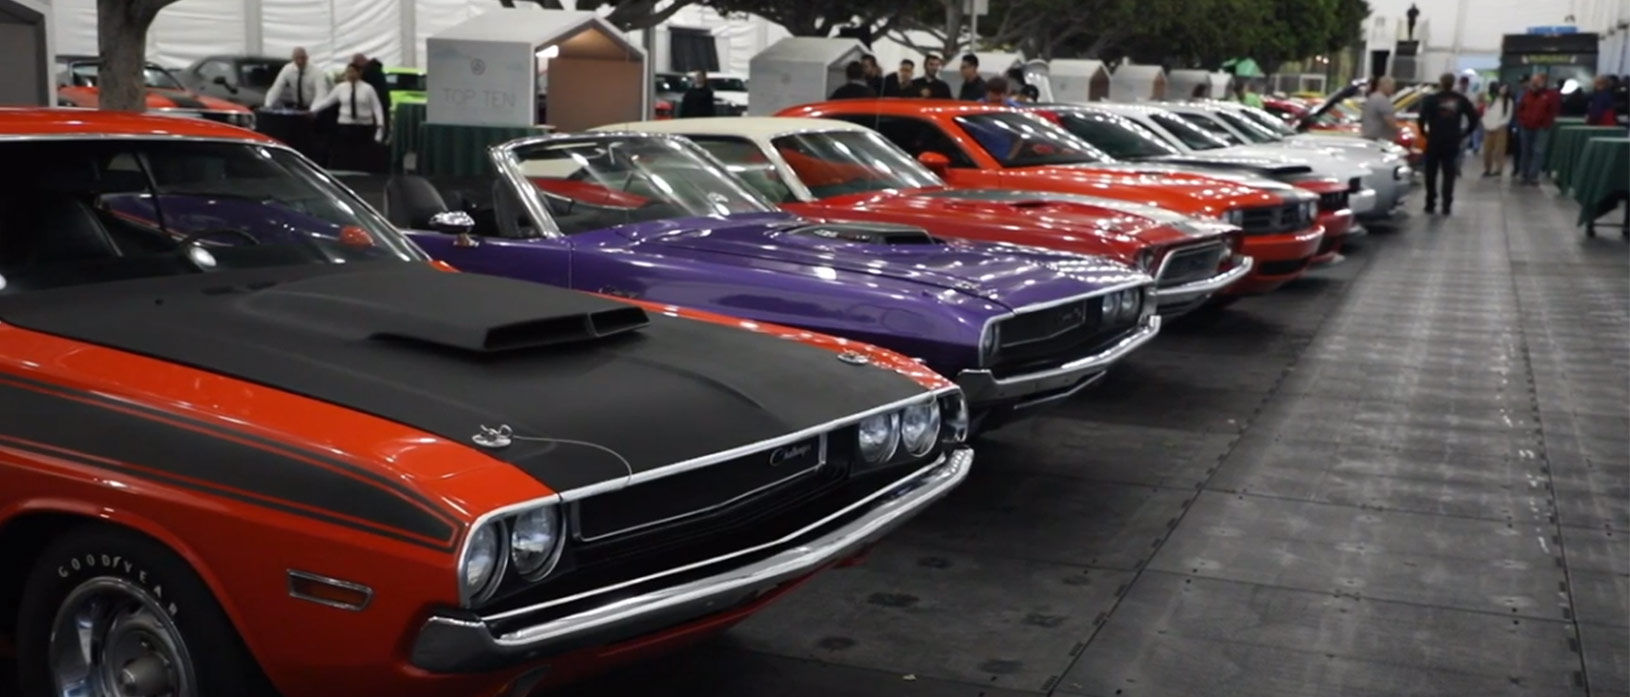 rows of dodge cars